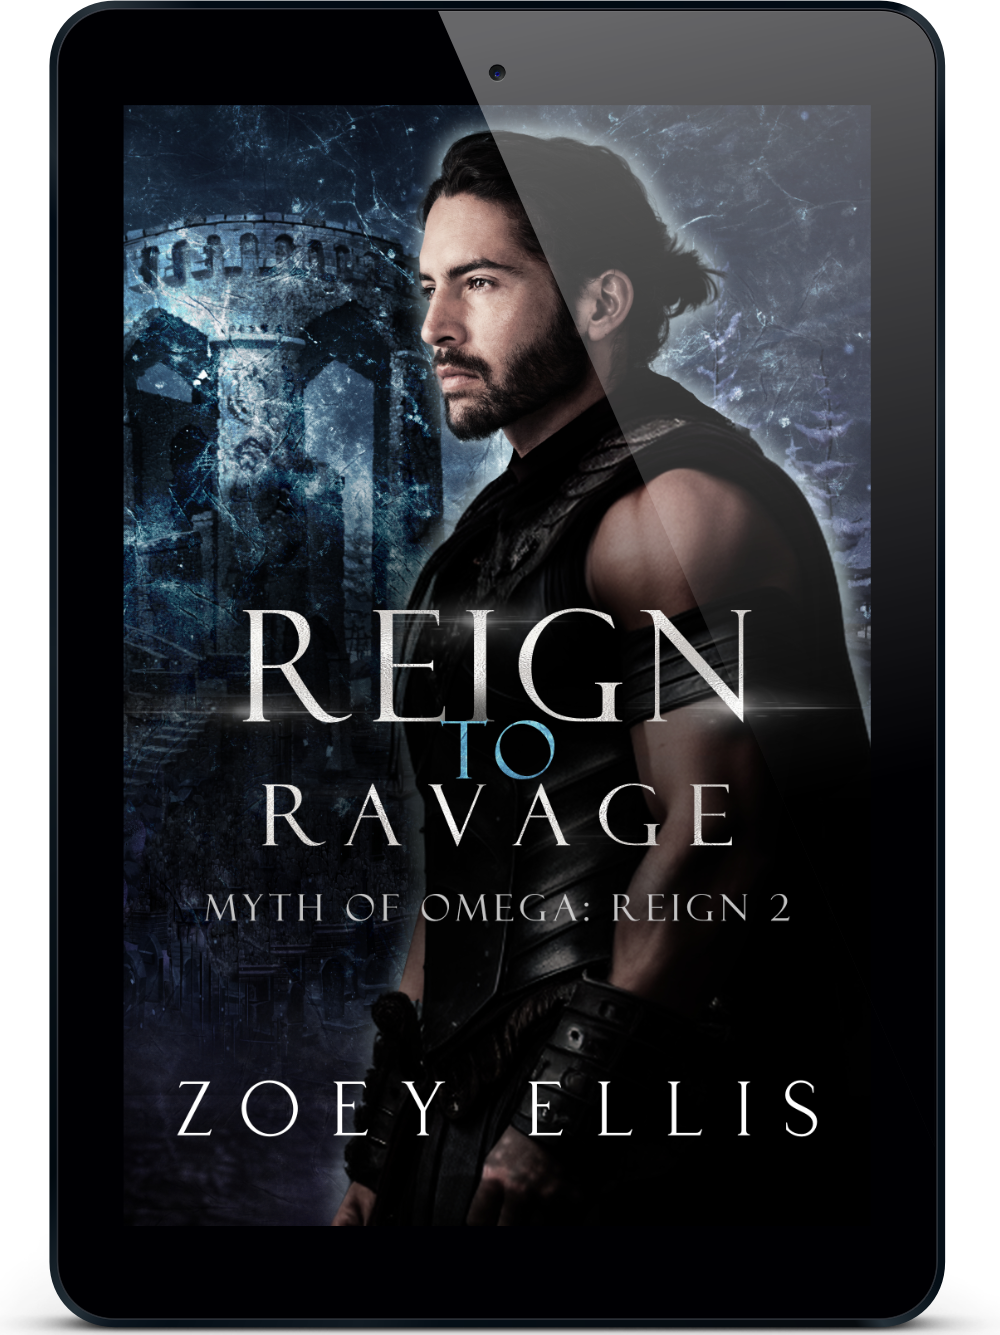 Reign To Ravage (Myth of Omega: Reign 2)